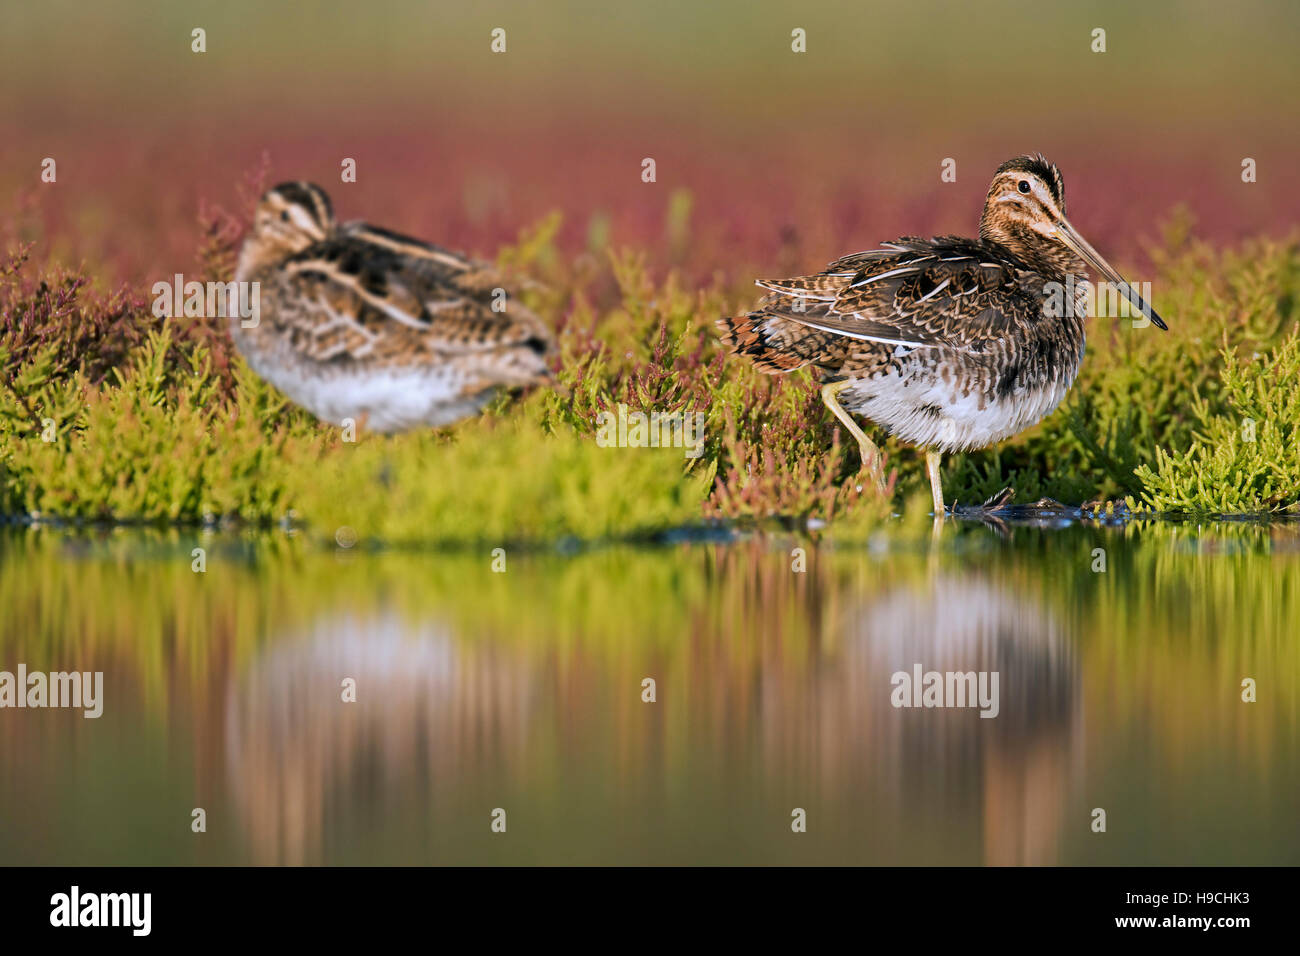 Two common snipes (Gallinago gallinago) resting among marsh samphire in saltmarsh in late summer Stock Photo